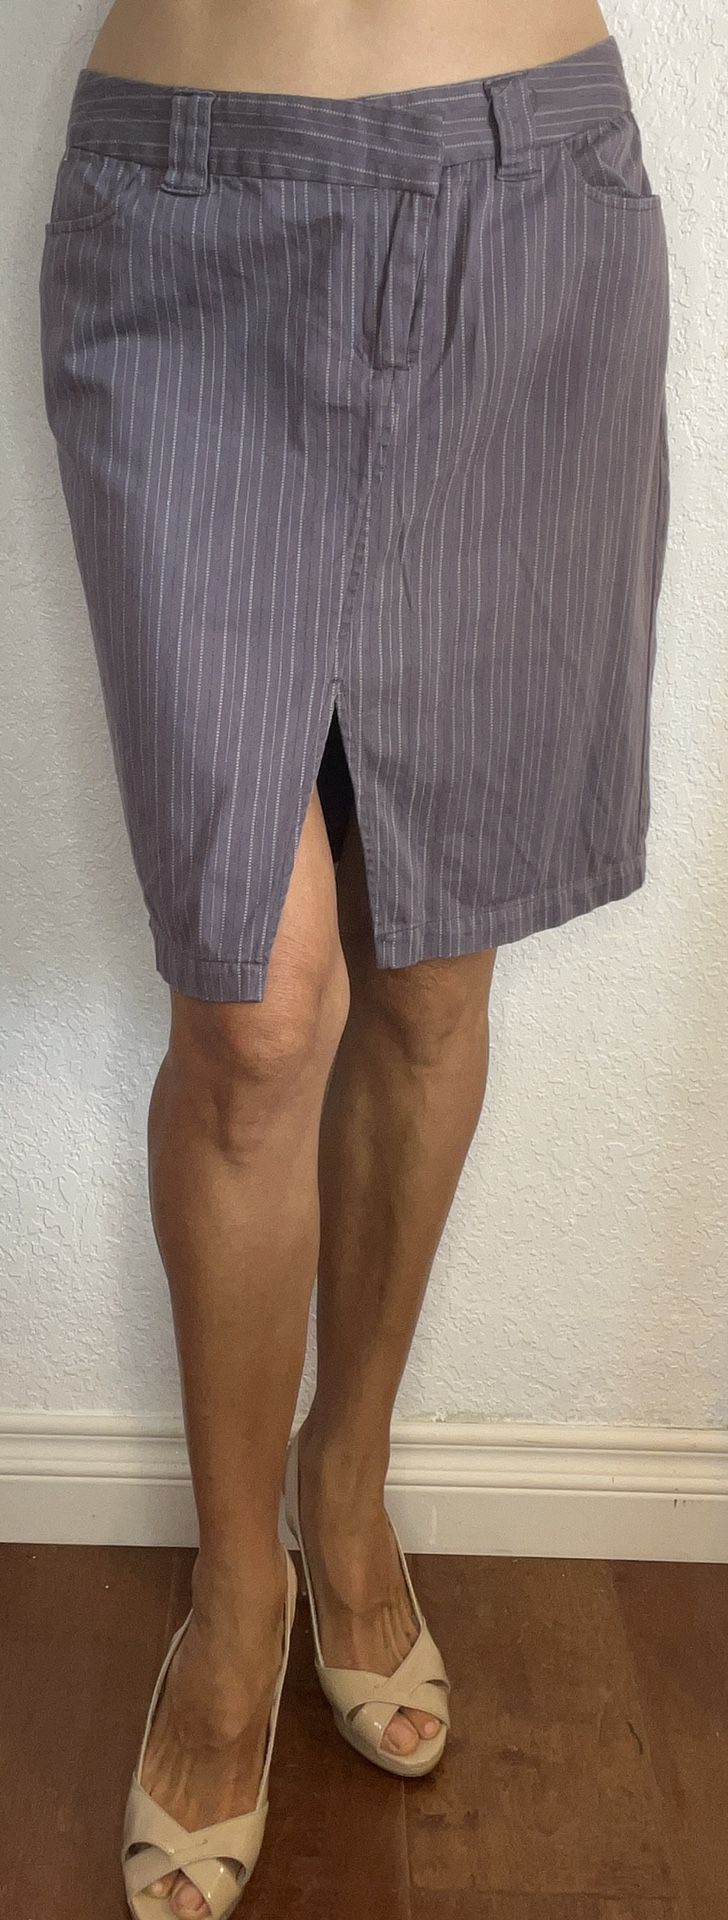 Xhilaration Grey and White Pinstriped Pencil Skirt w/ Front Slit (9)